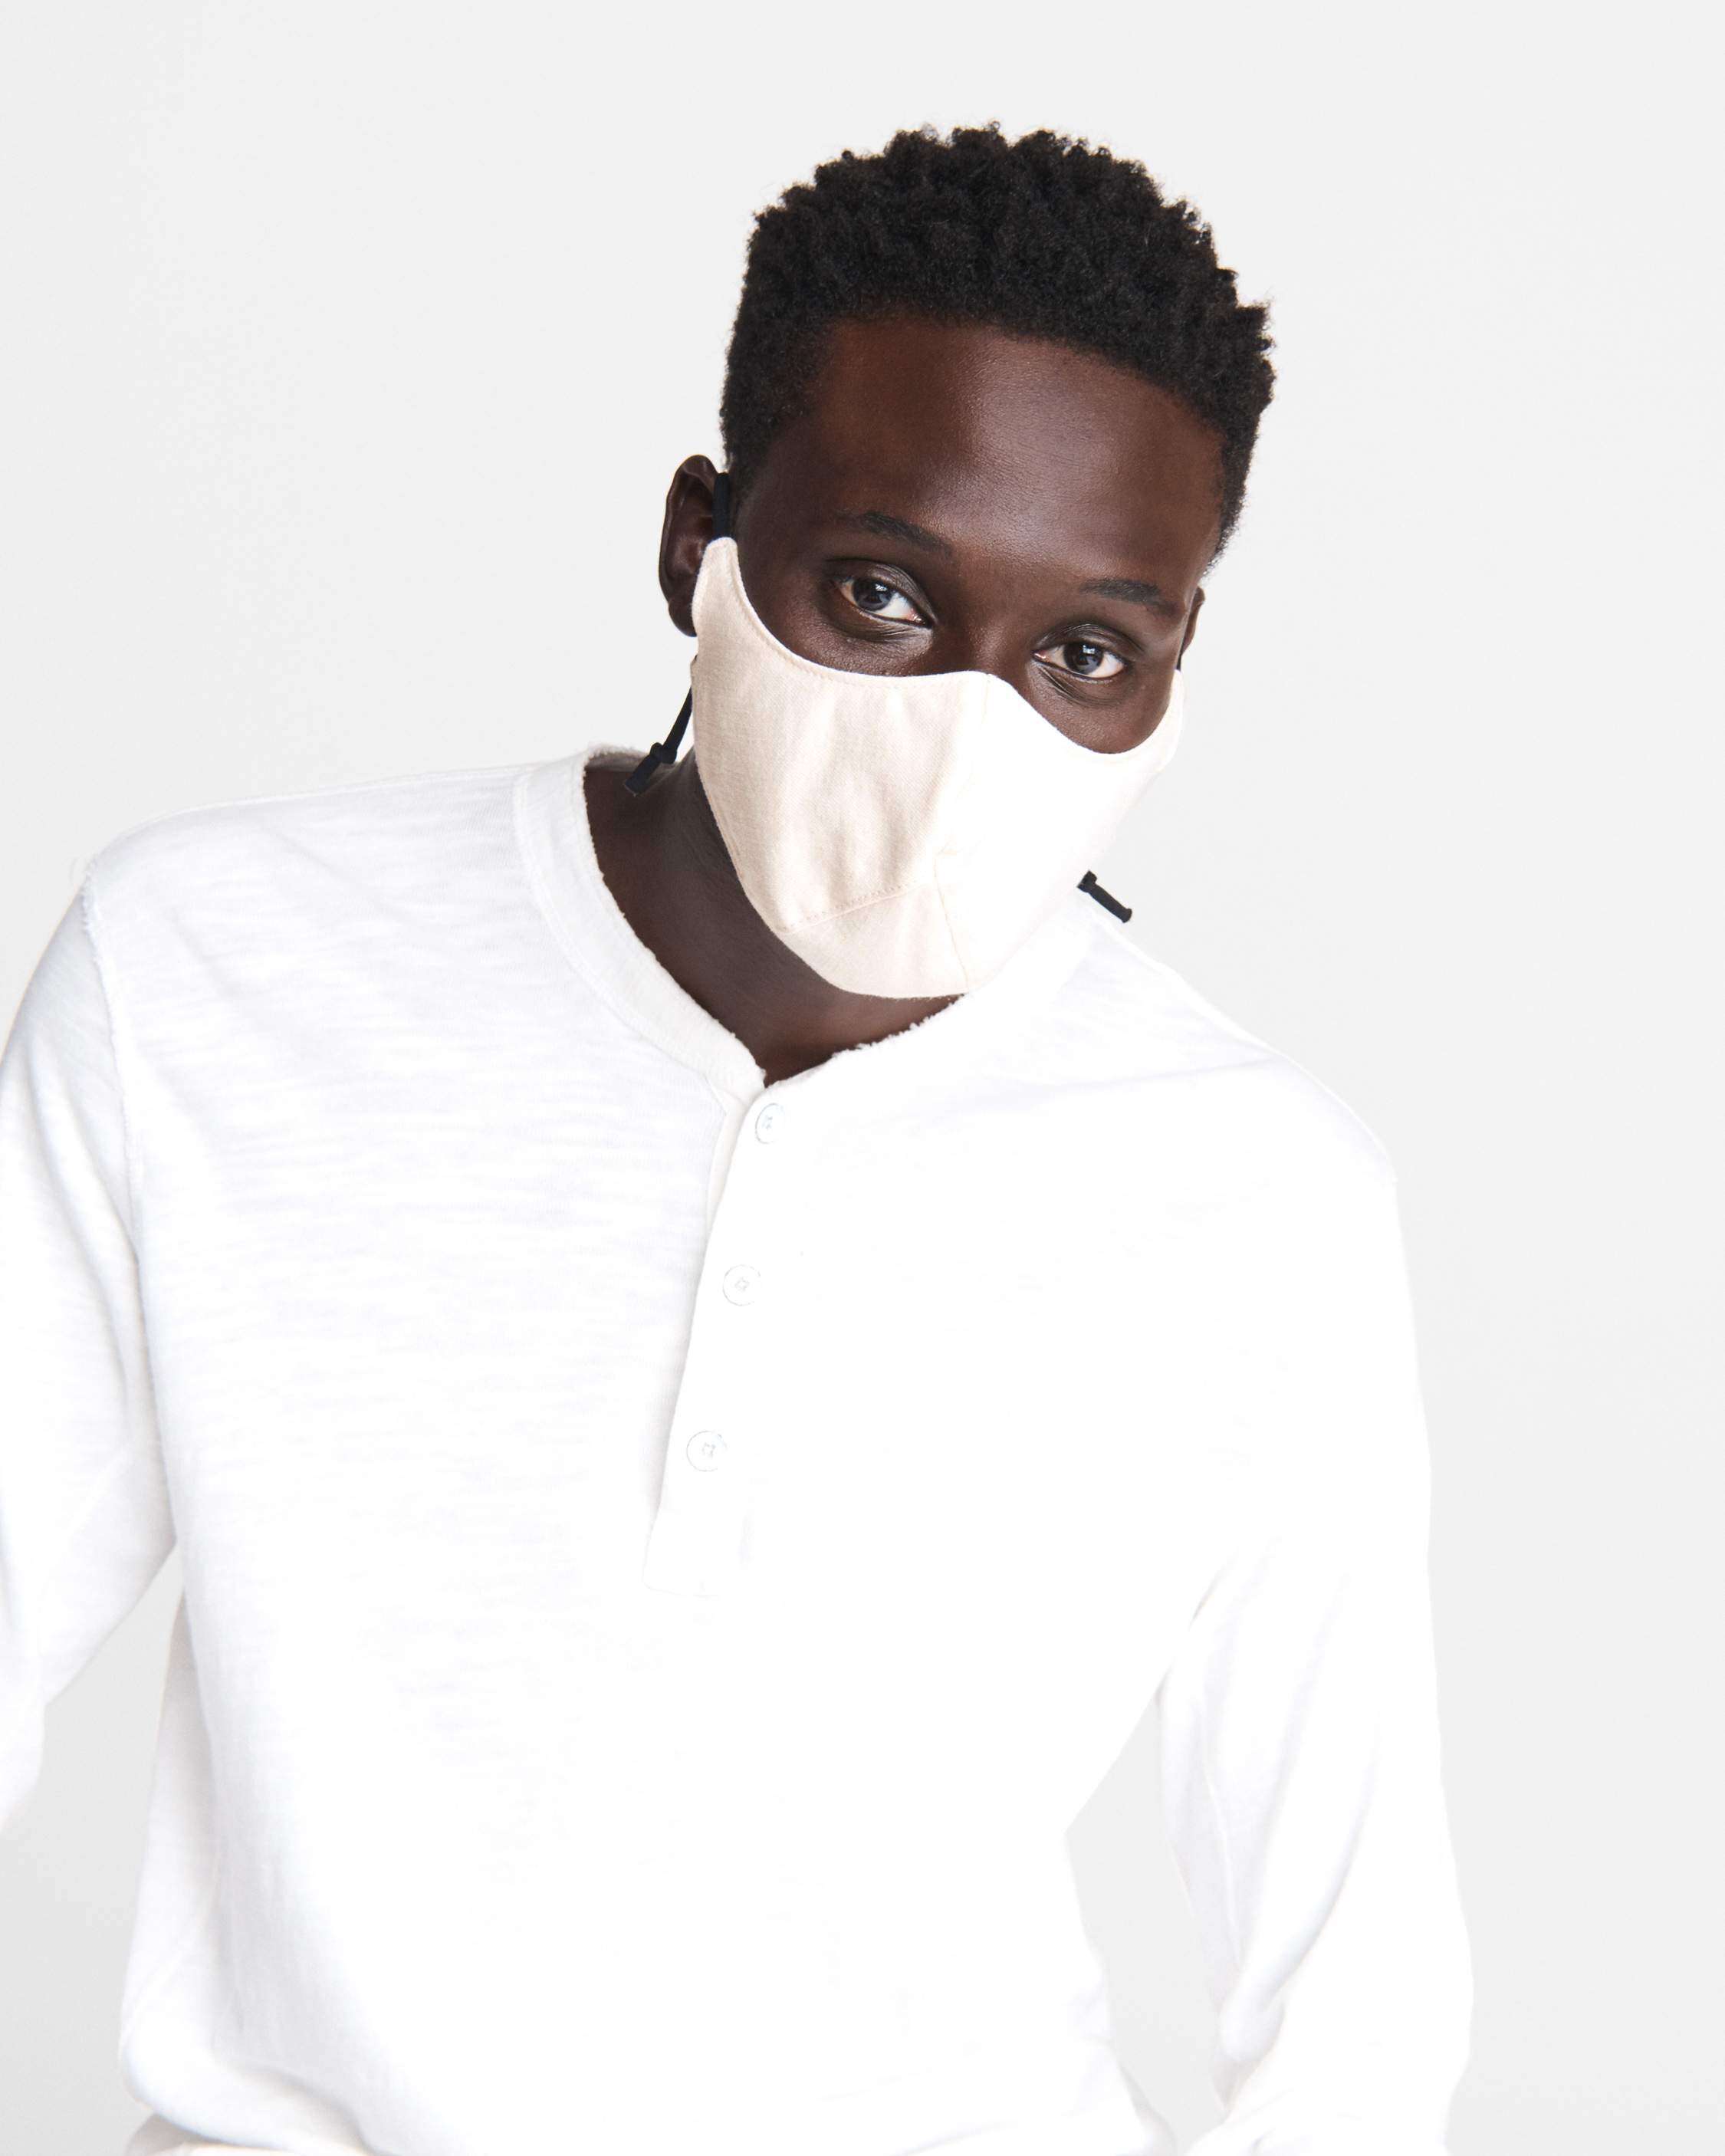 rag & bone - The Stealth Mask Pack $55What we like:-Made in the USA with upcycled fabrication by their original manufacturing partners-Comes in 3 different neutral colors-100% Cotton lining